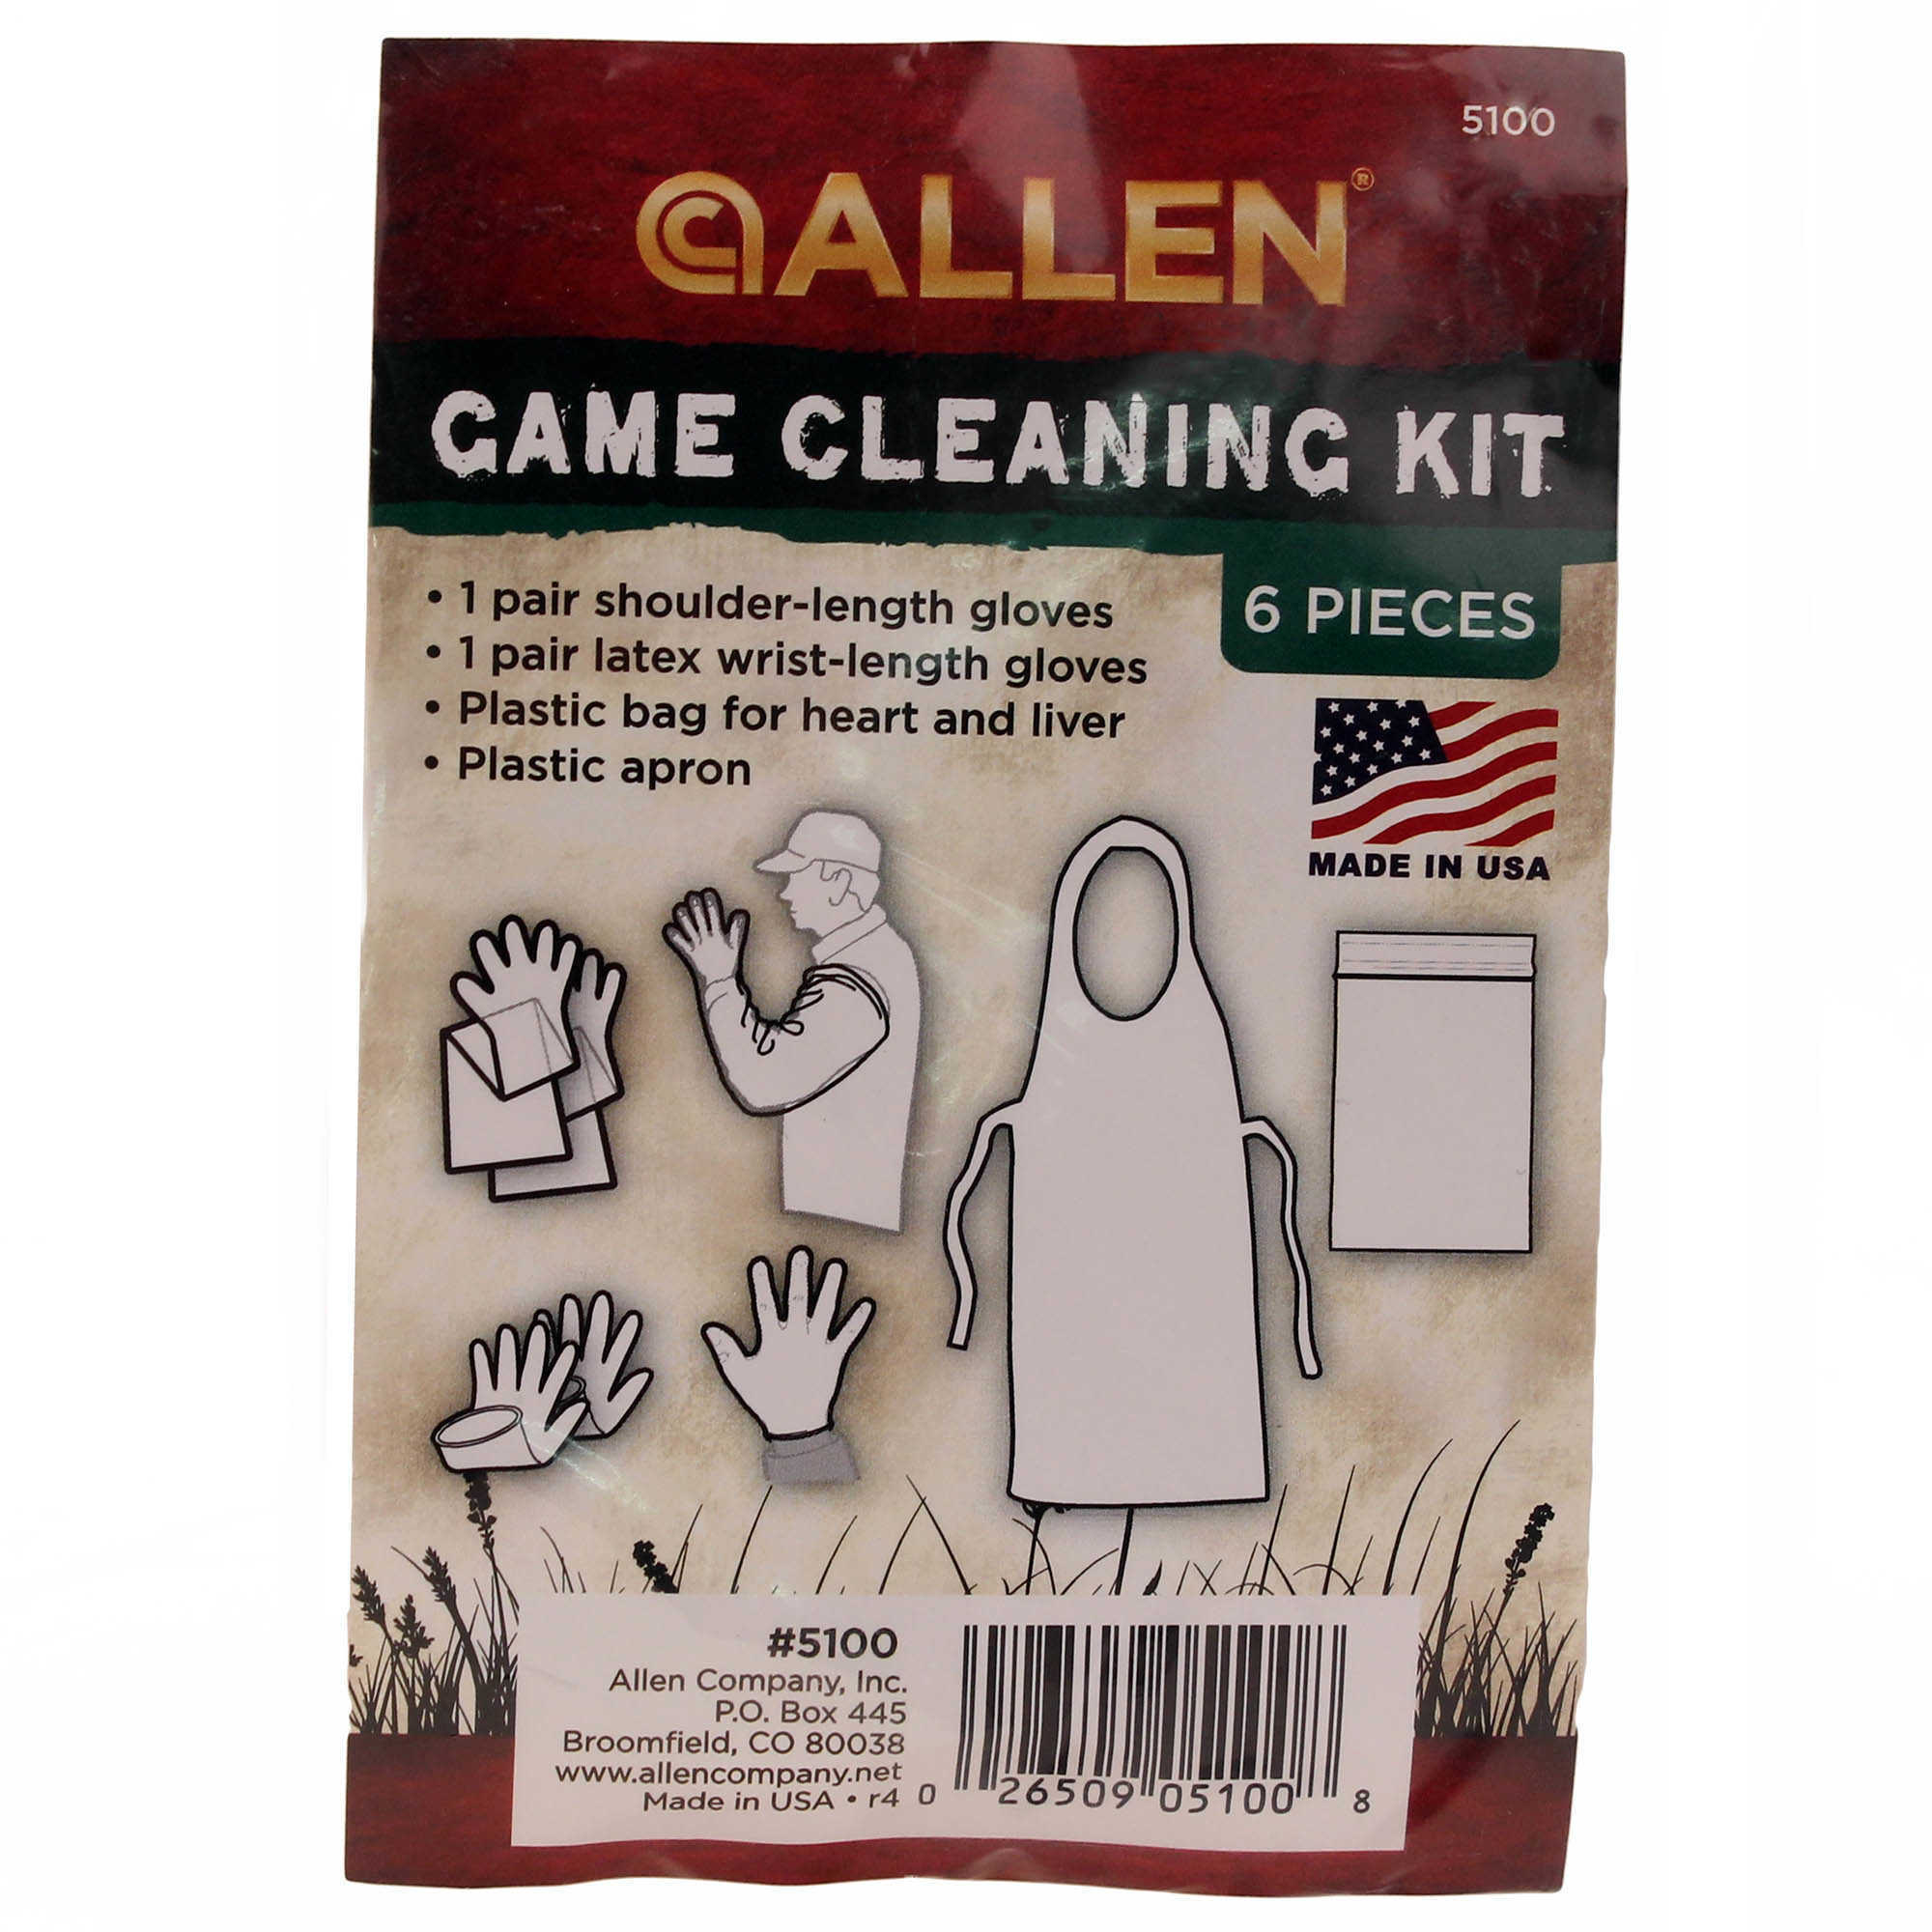 Allen Cases Game Cleaning Kit with Shoulder Length Gloves/Apron & Wrist Md: 5100